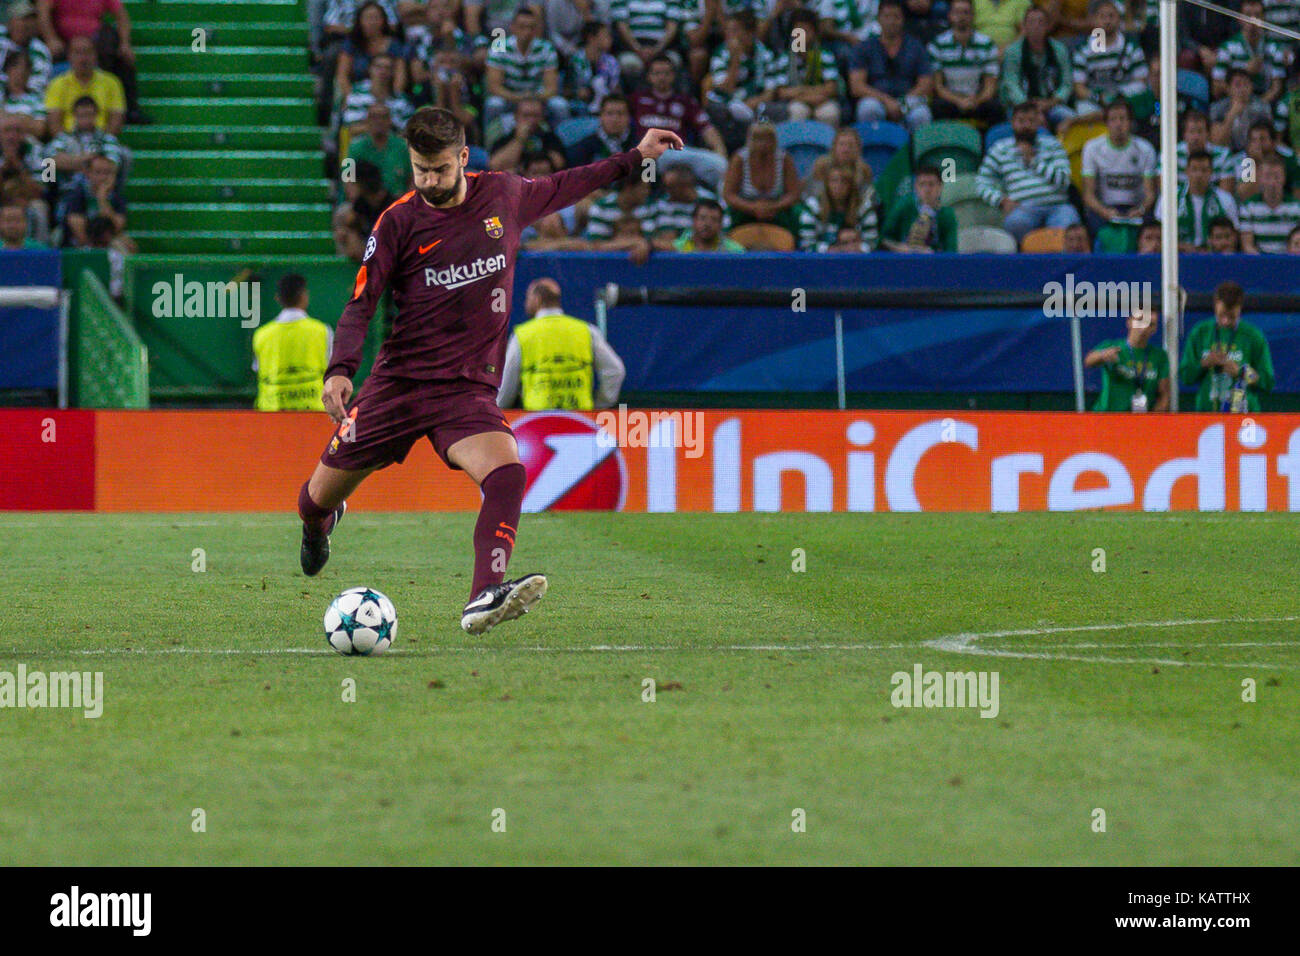 Lisbon, Portugal. 27th Sep, 2017. Barcelona's defender from Spain Gerard Pique (3) during the game of the 2nd round of the UEFA Champions League Group D, Sporting CP v FC Barcelona Credit: Alexandre de Sousa/Alamy Live News Stock Photo